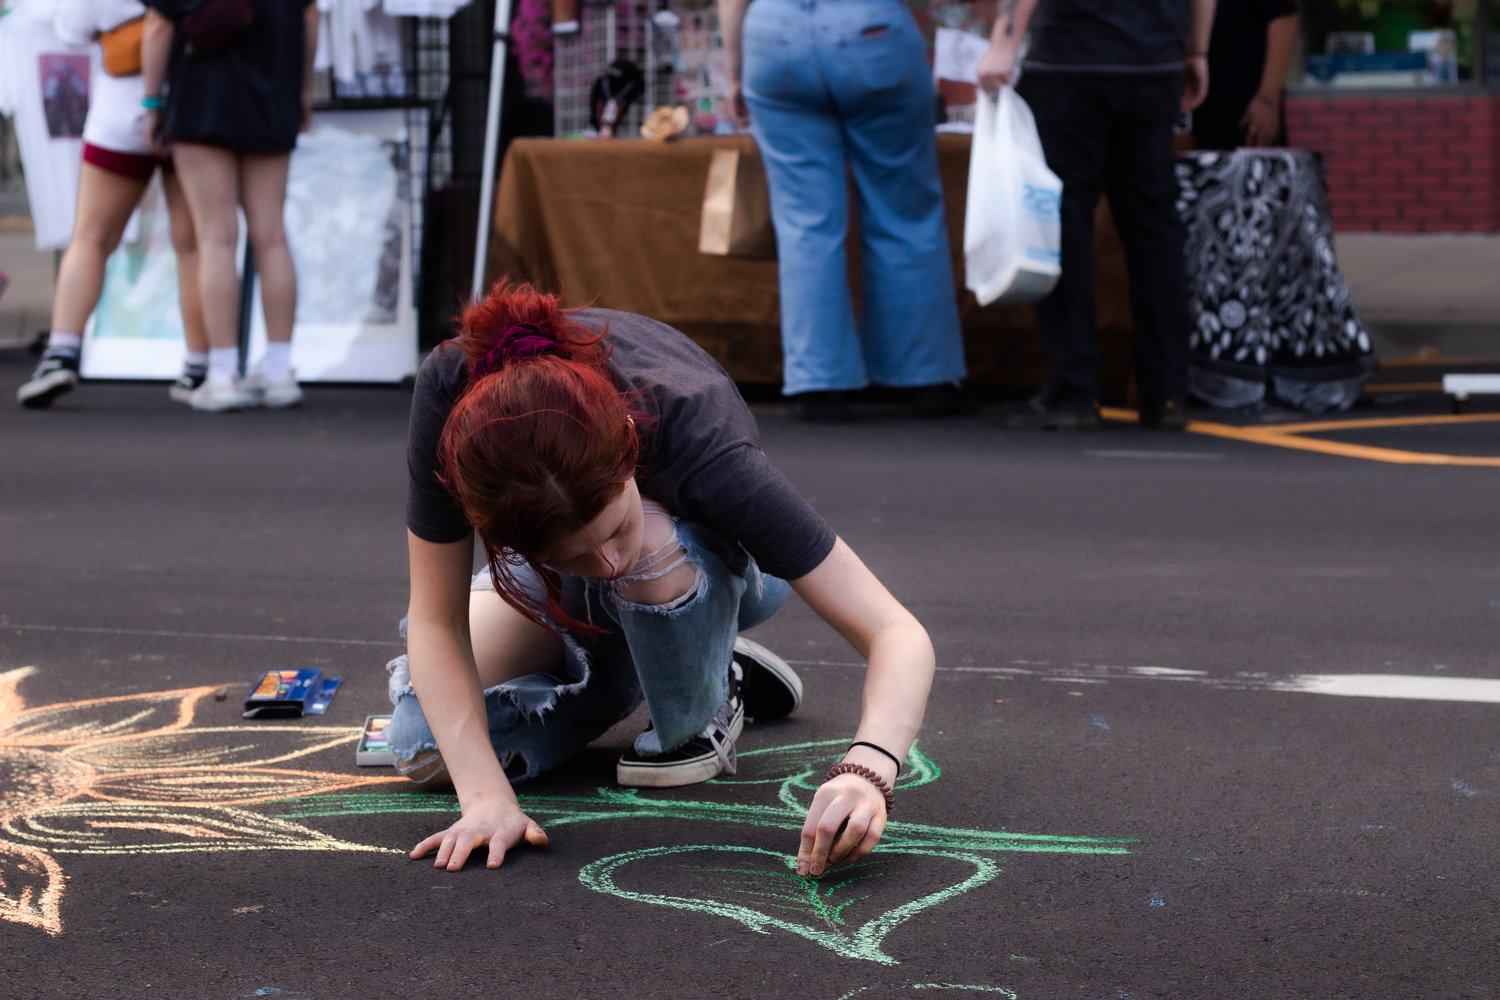 Pittsburg resident Emily Taffner draws a sunflower with chalk on the pavement in the middle of the Pittsburg ArtWalk. Taffner said she had spent about half an hour drawing the flower. MORIE PRICE / THE MORNING SUN